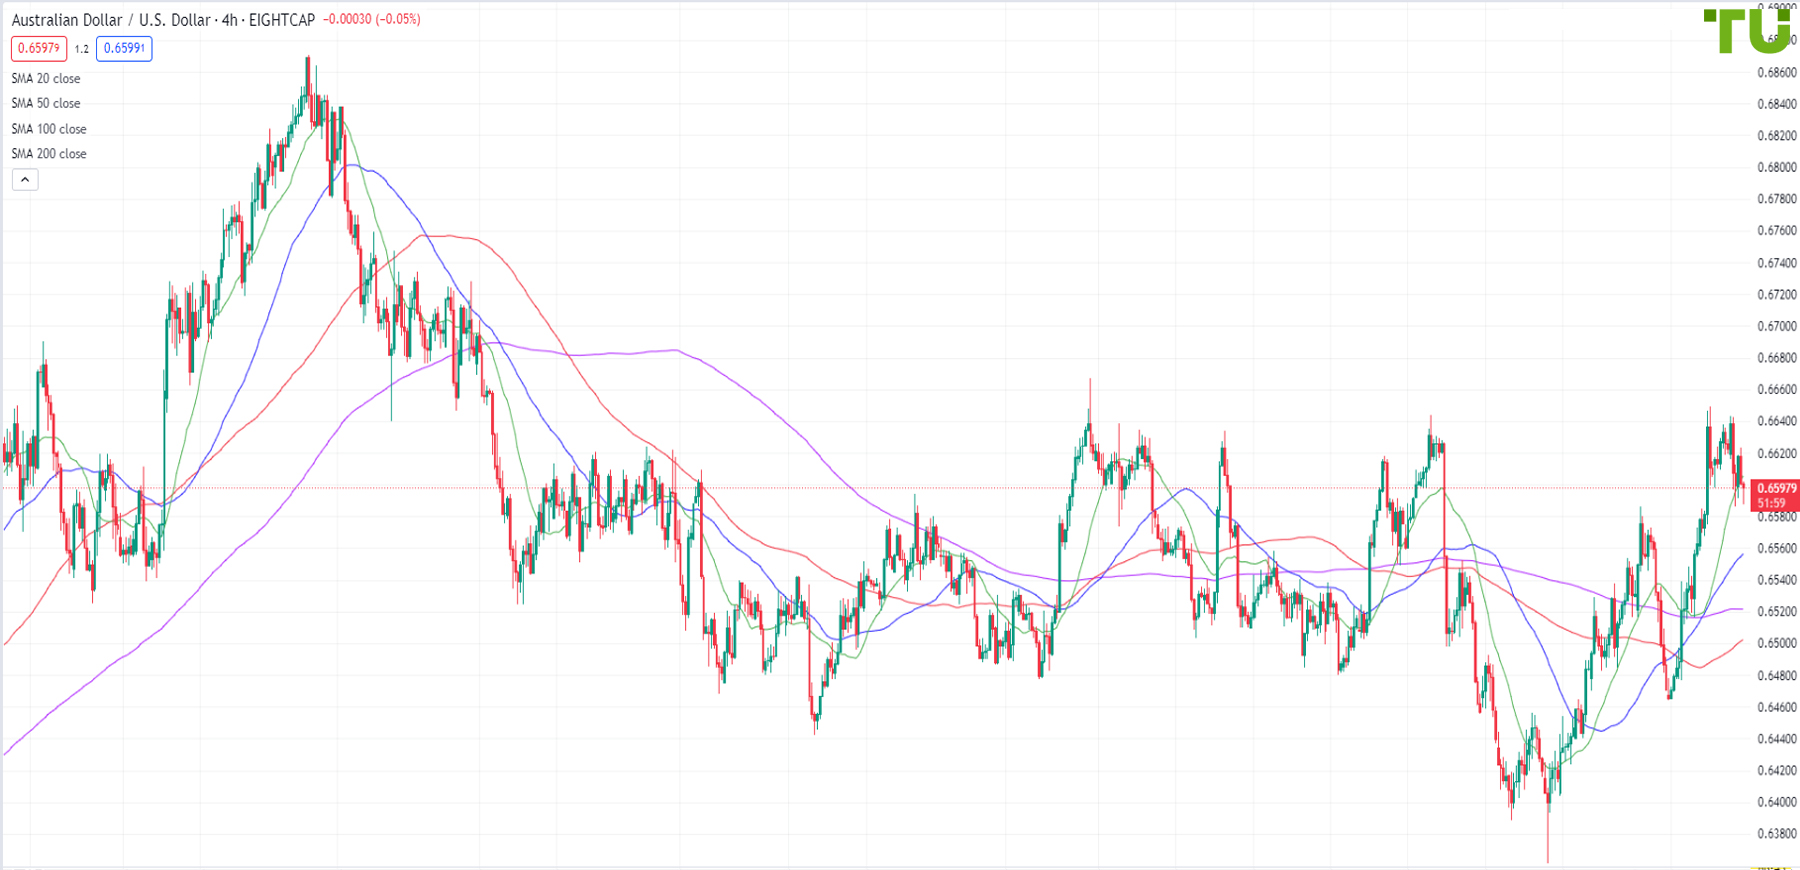 AUD/USD retreats to 0.6590 support